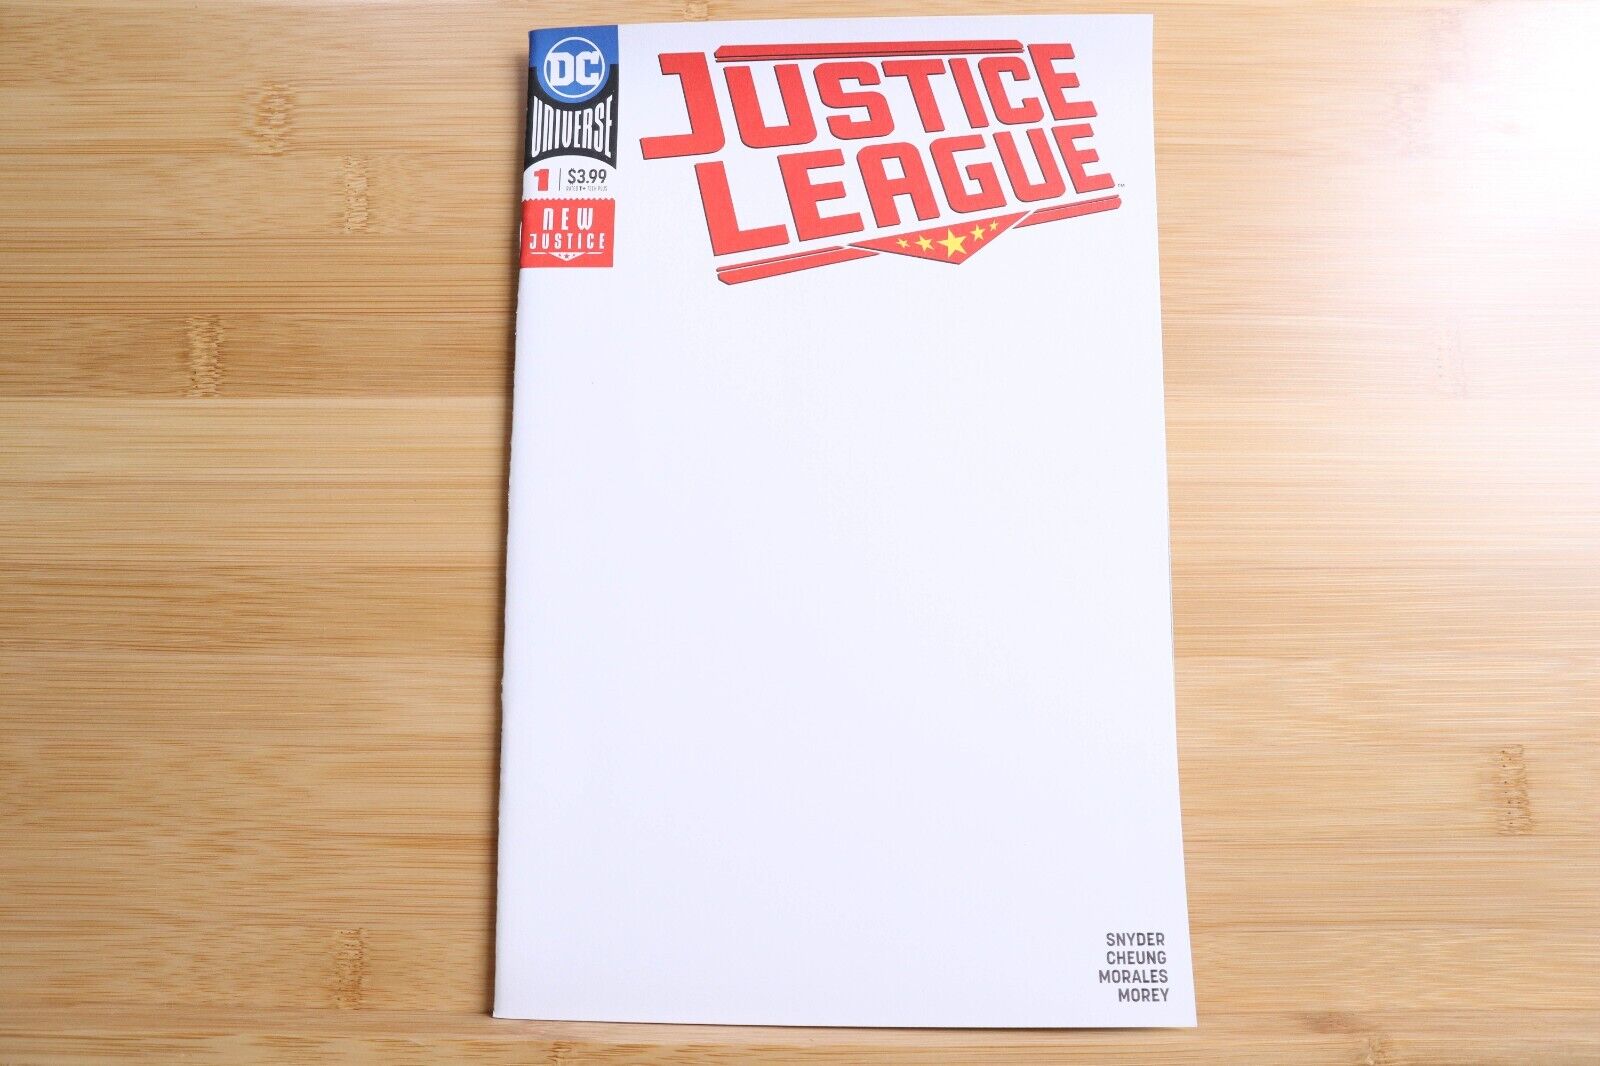 JUSTICE LEAGUE #1 Blank Sketch Variant NM - 2018